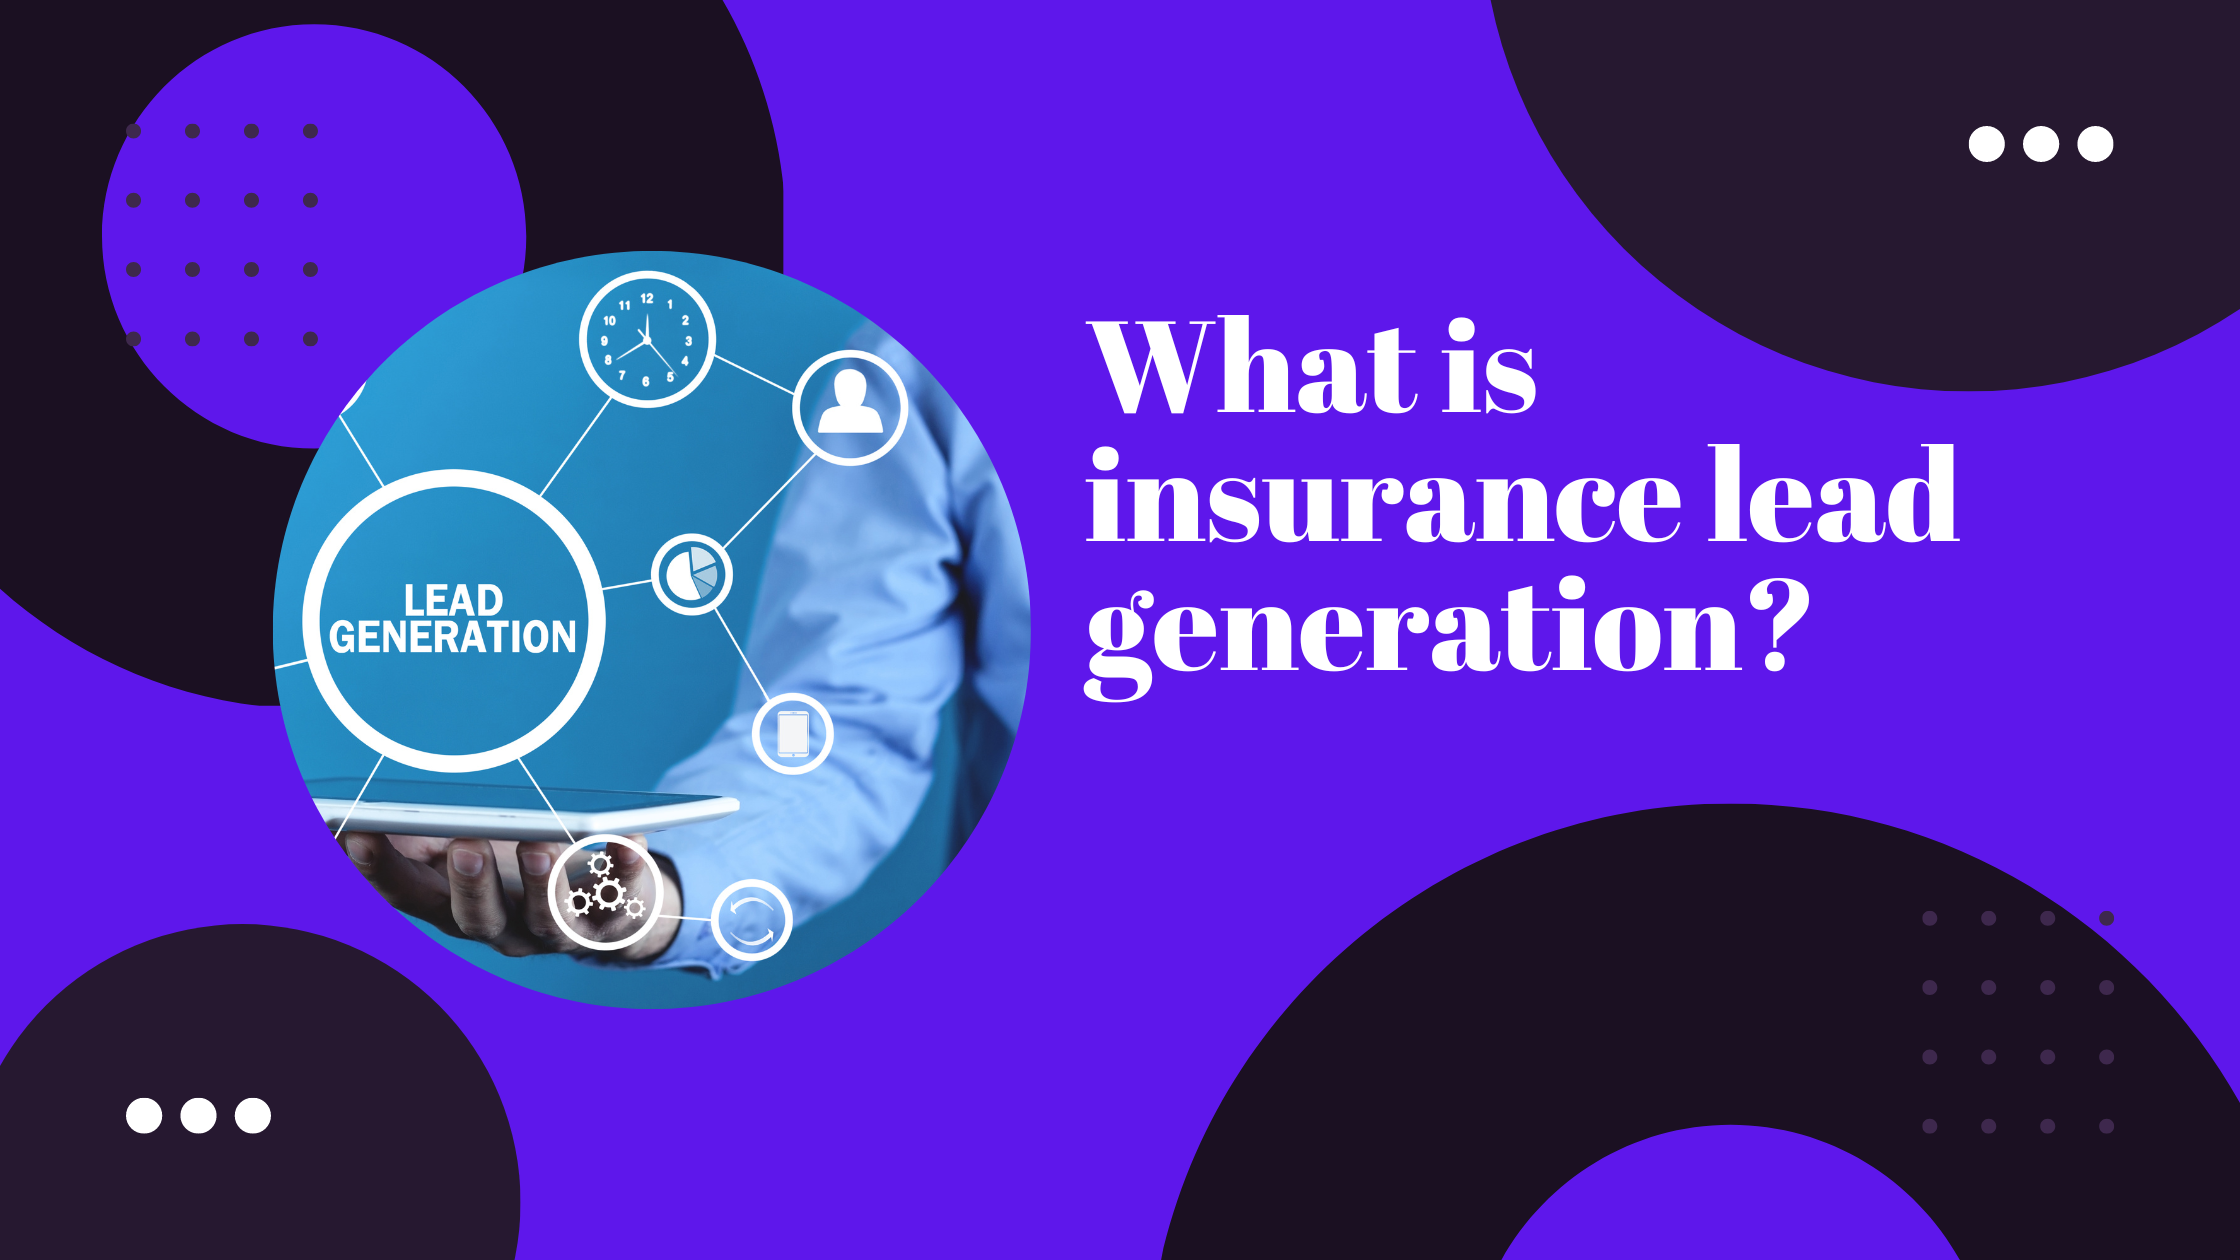 What is insurance lead generation